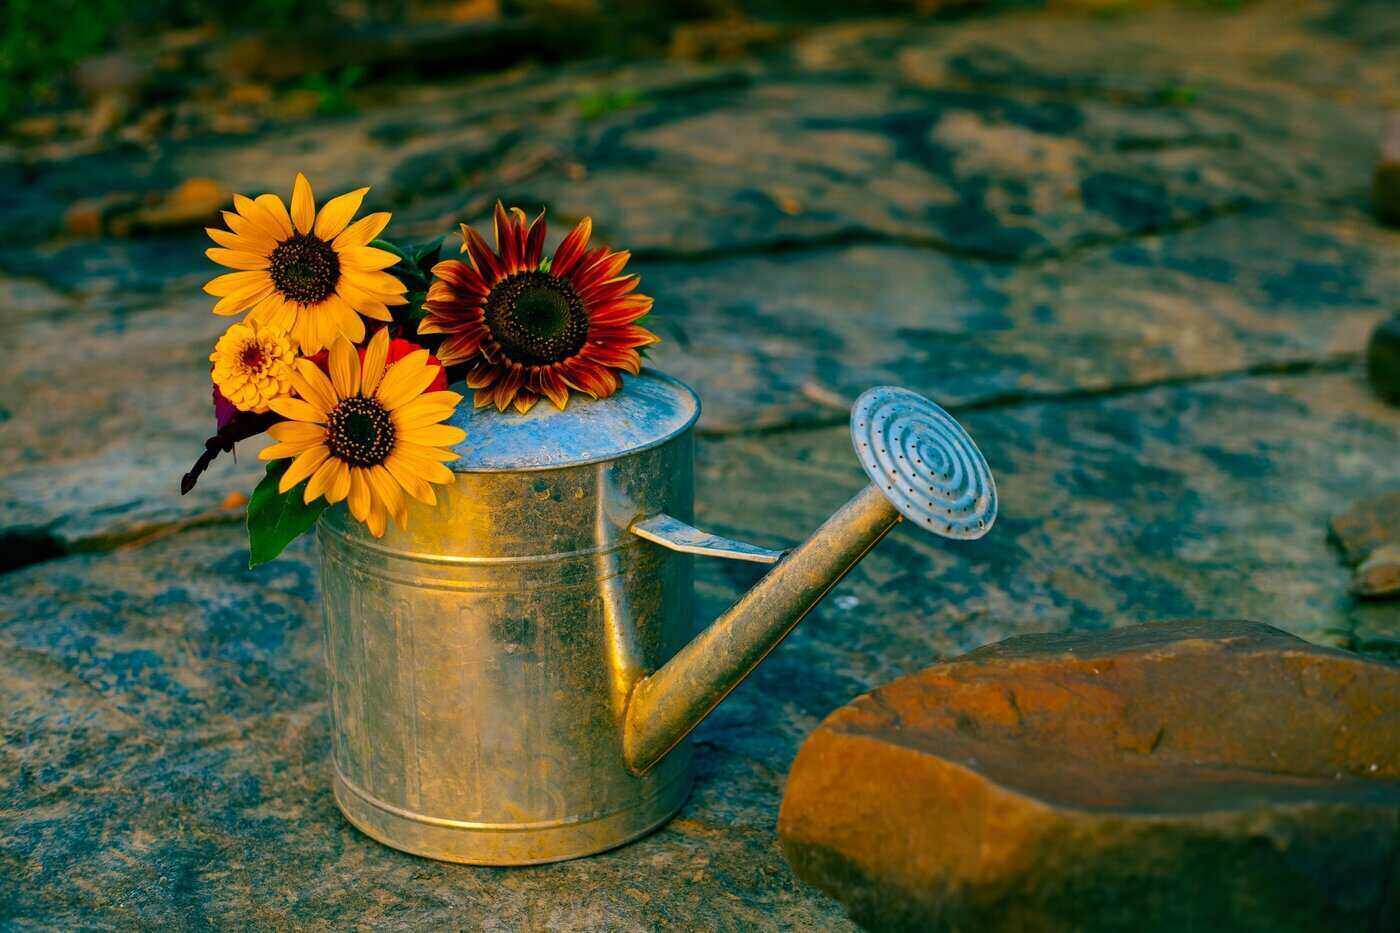 sunflowers in watering can - how is over-irrigation damaging to the soil